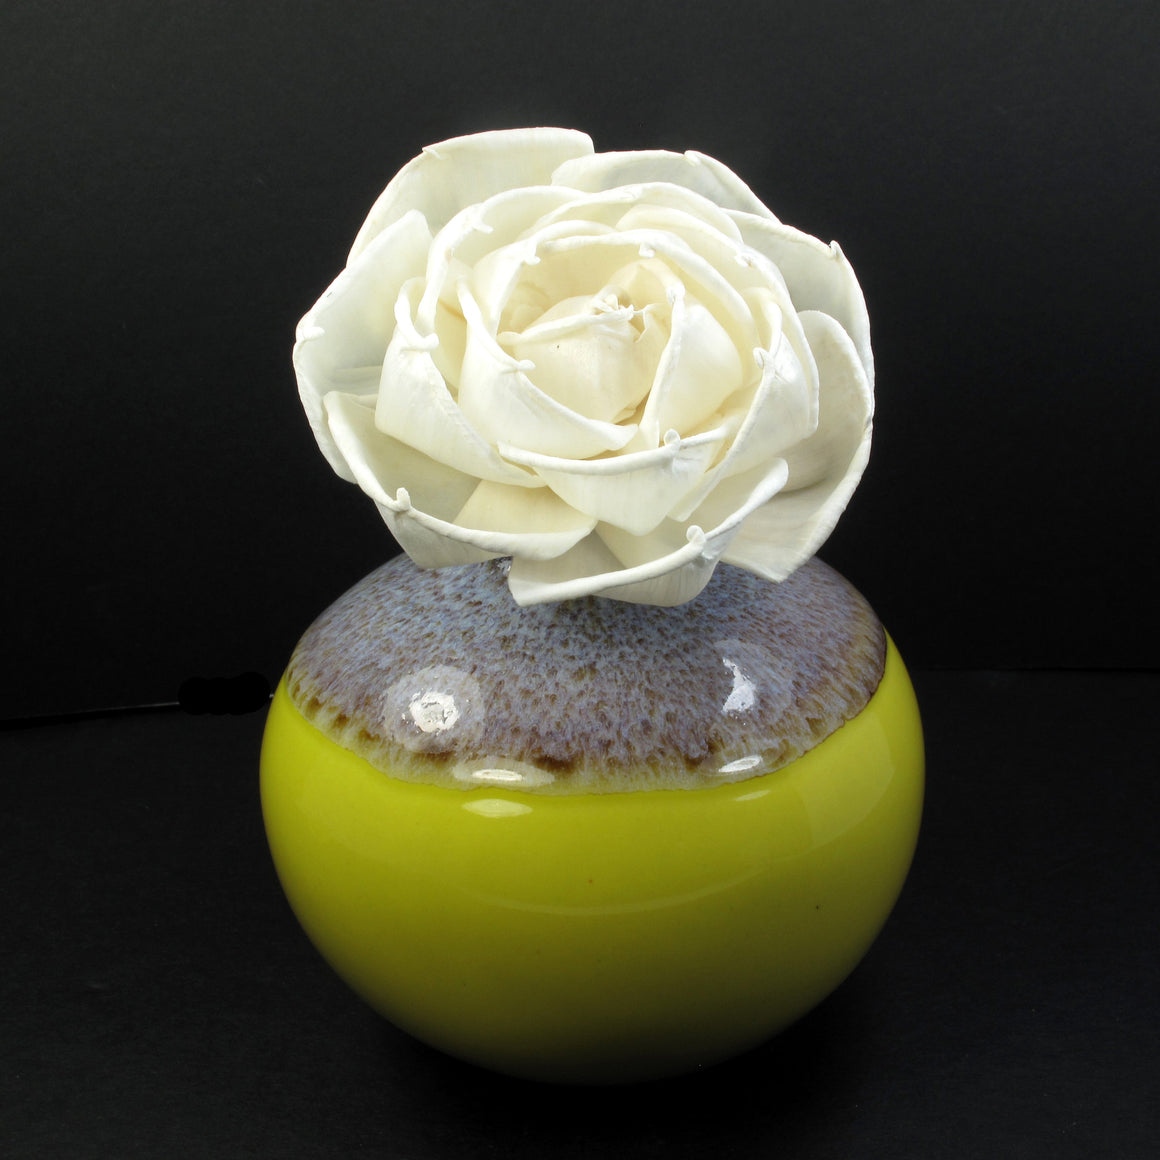 Sola Wood Flower Aroma Oil Diffuser with a Bendable Cotton Wire Wick, Tea Rose - TropicaZona